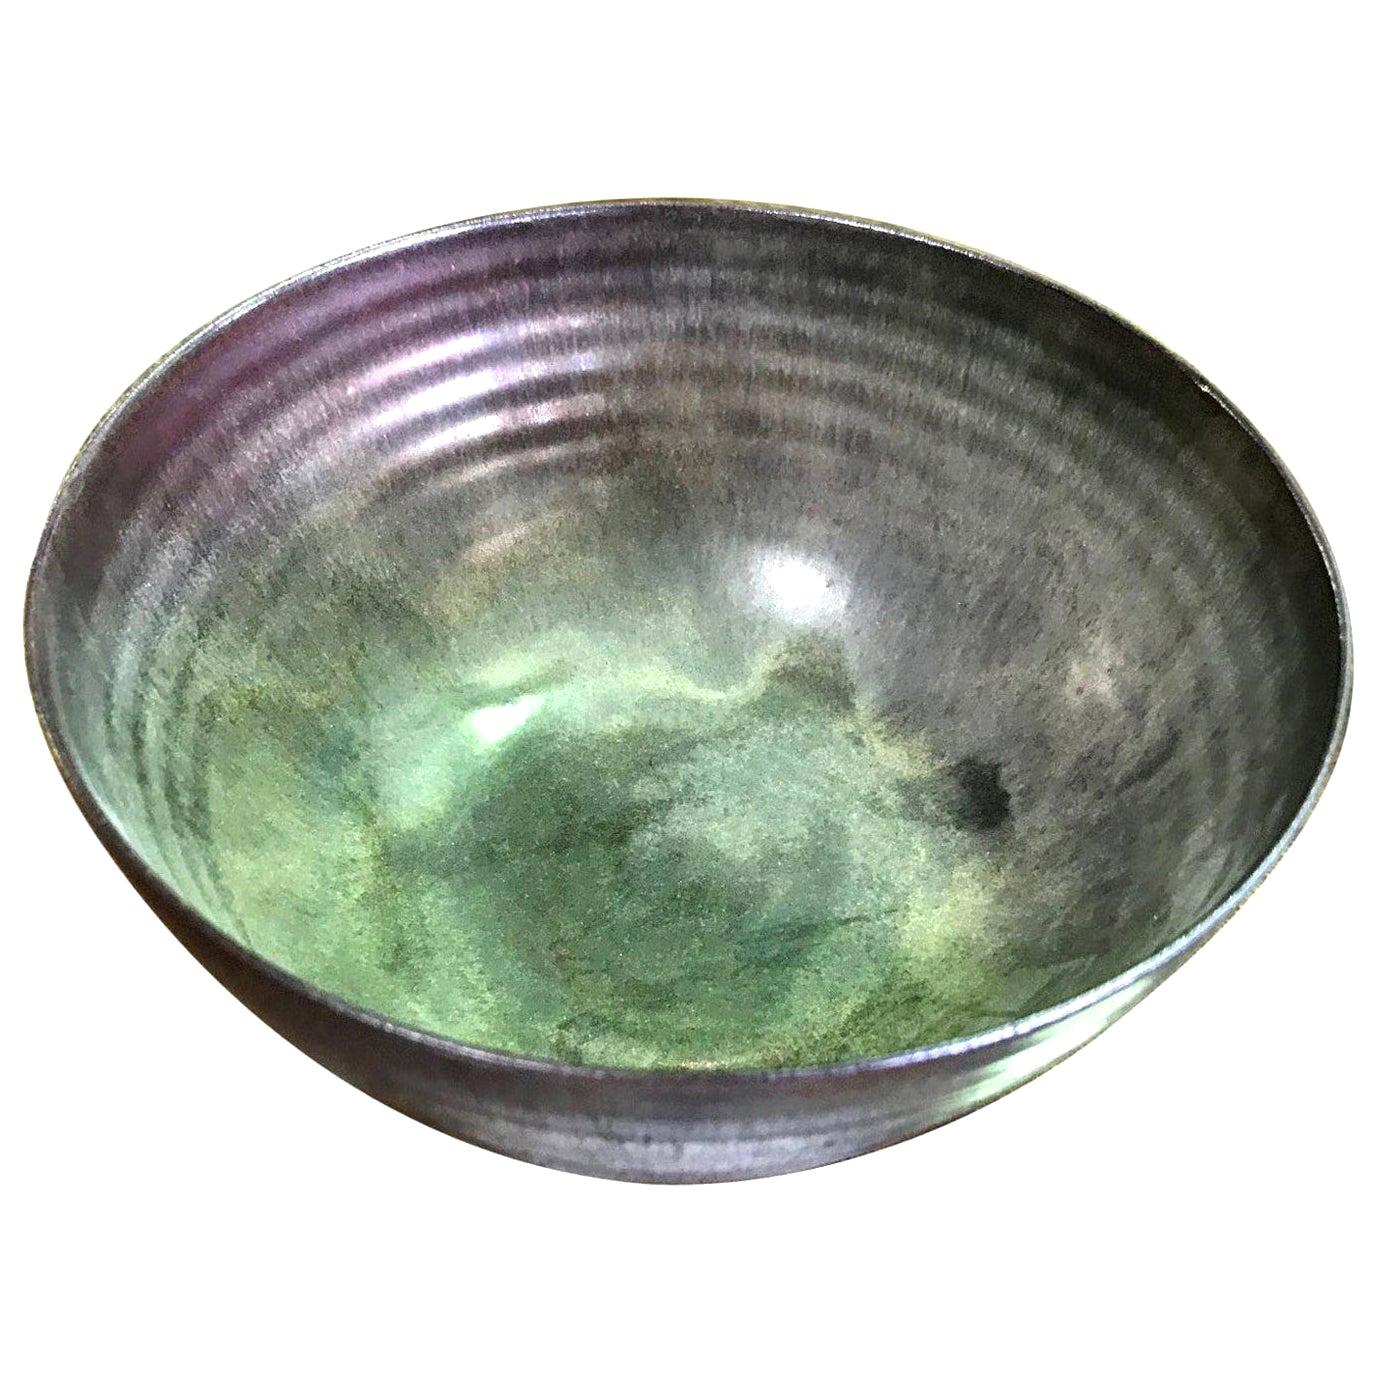 Otto and Gertrud Natzler Reduction Crystalline Glaze Bowl with Paper Label, 1954